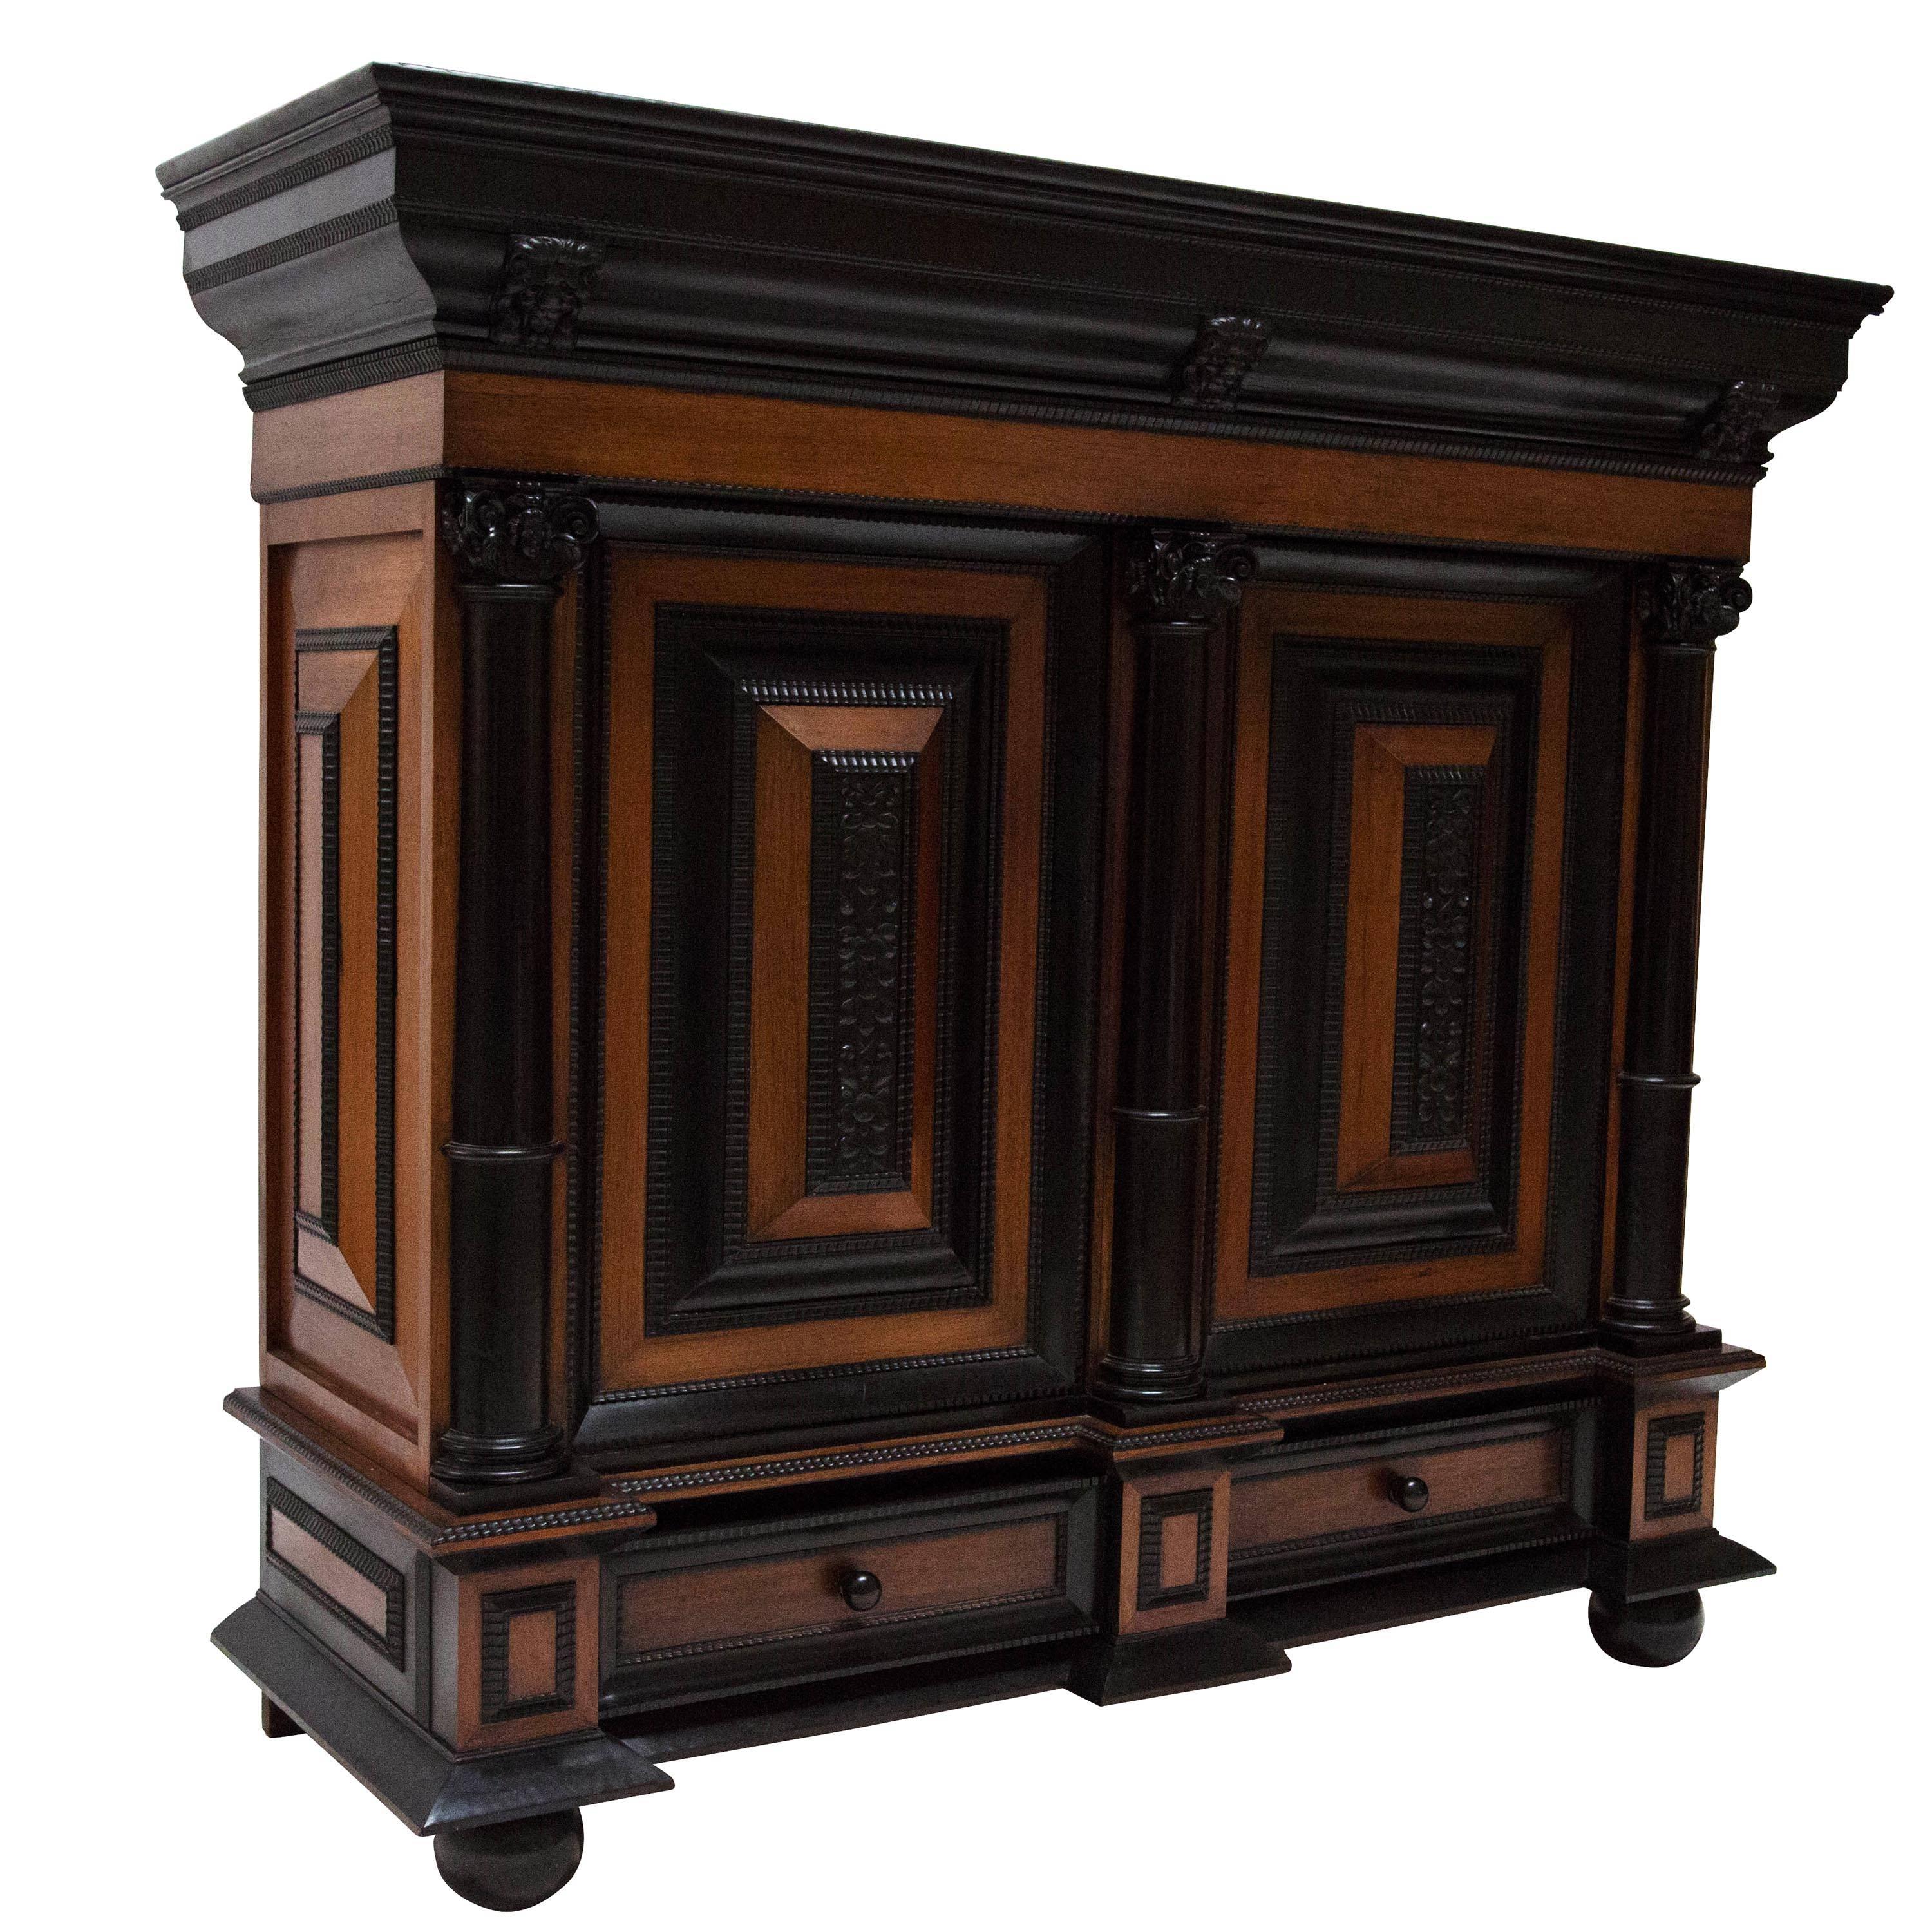 Stunning, rosewood and solid ebony (not ebonised) 18th Century Dutch cabinet of beautiful and well balanced proportion.